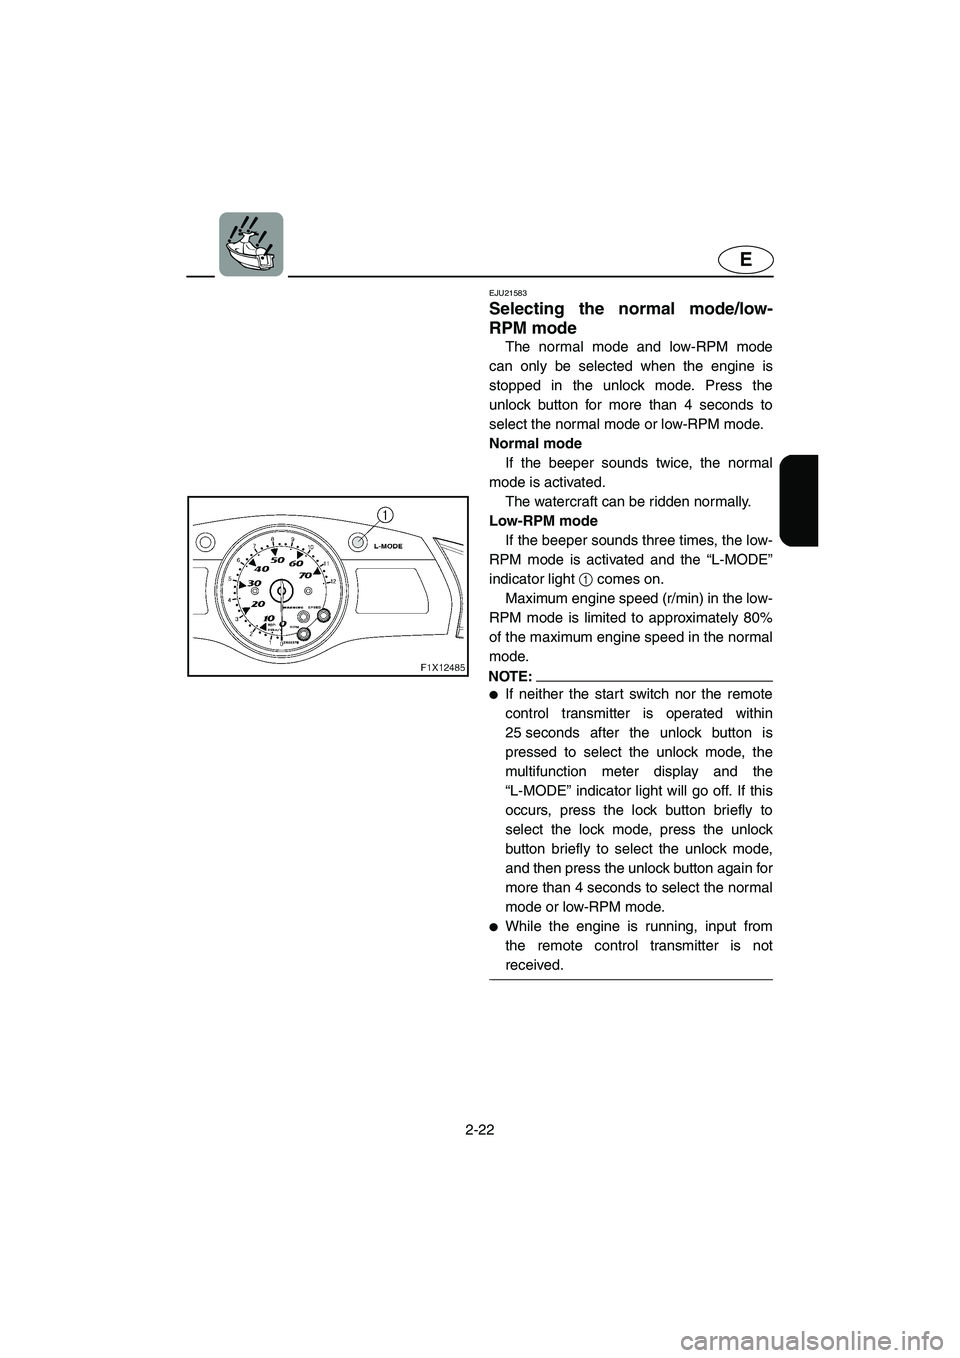 YAMAHA FX HO 2006 Workshop Manual 2-22
E
EJU21583 
Selecting the normal mode/low-
RPM mode 
The normal mode and low-RPM mode
can only be selected when the engine is
stopped in the unlock mode. Press the
unlock button for more than 4 s